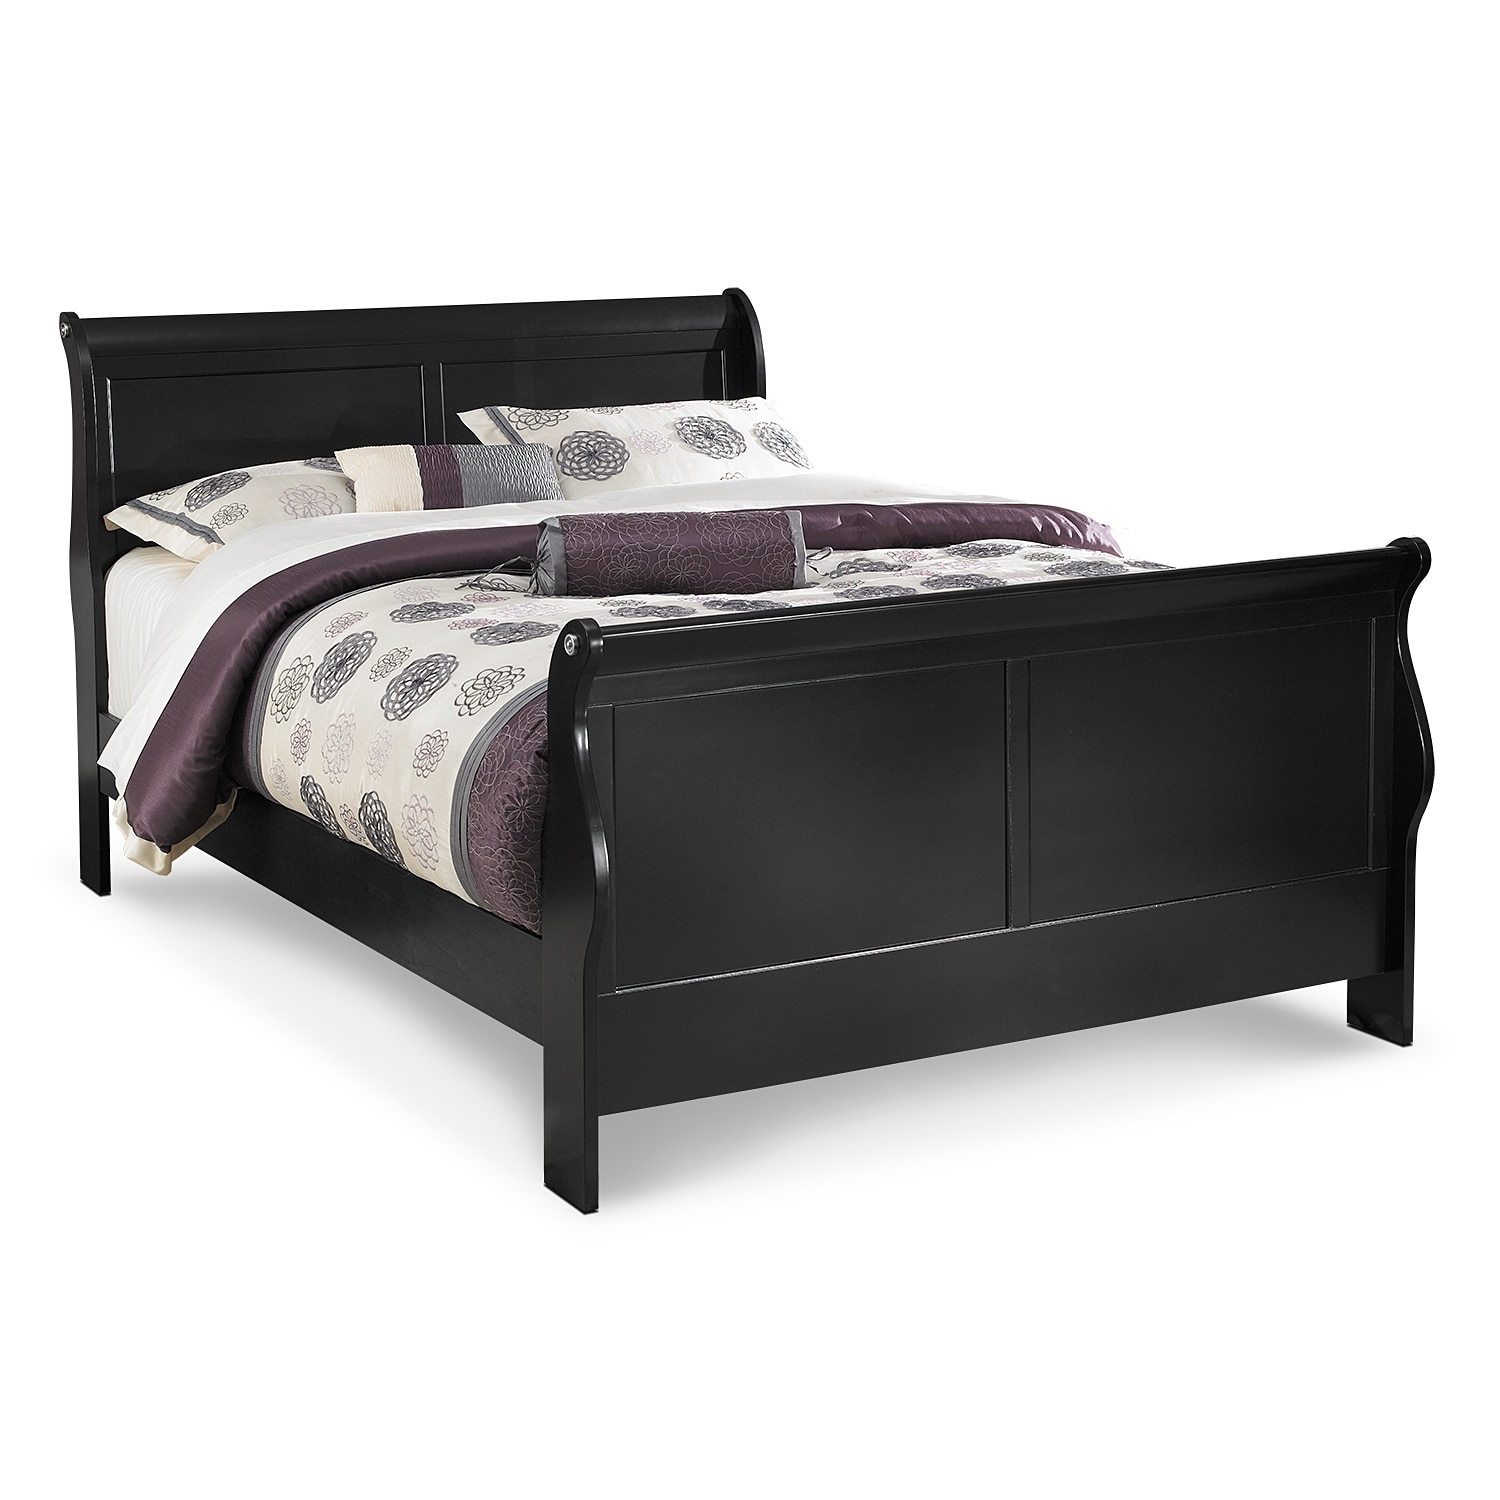 Undefined American Signature Furniture, American Signature King Bed